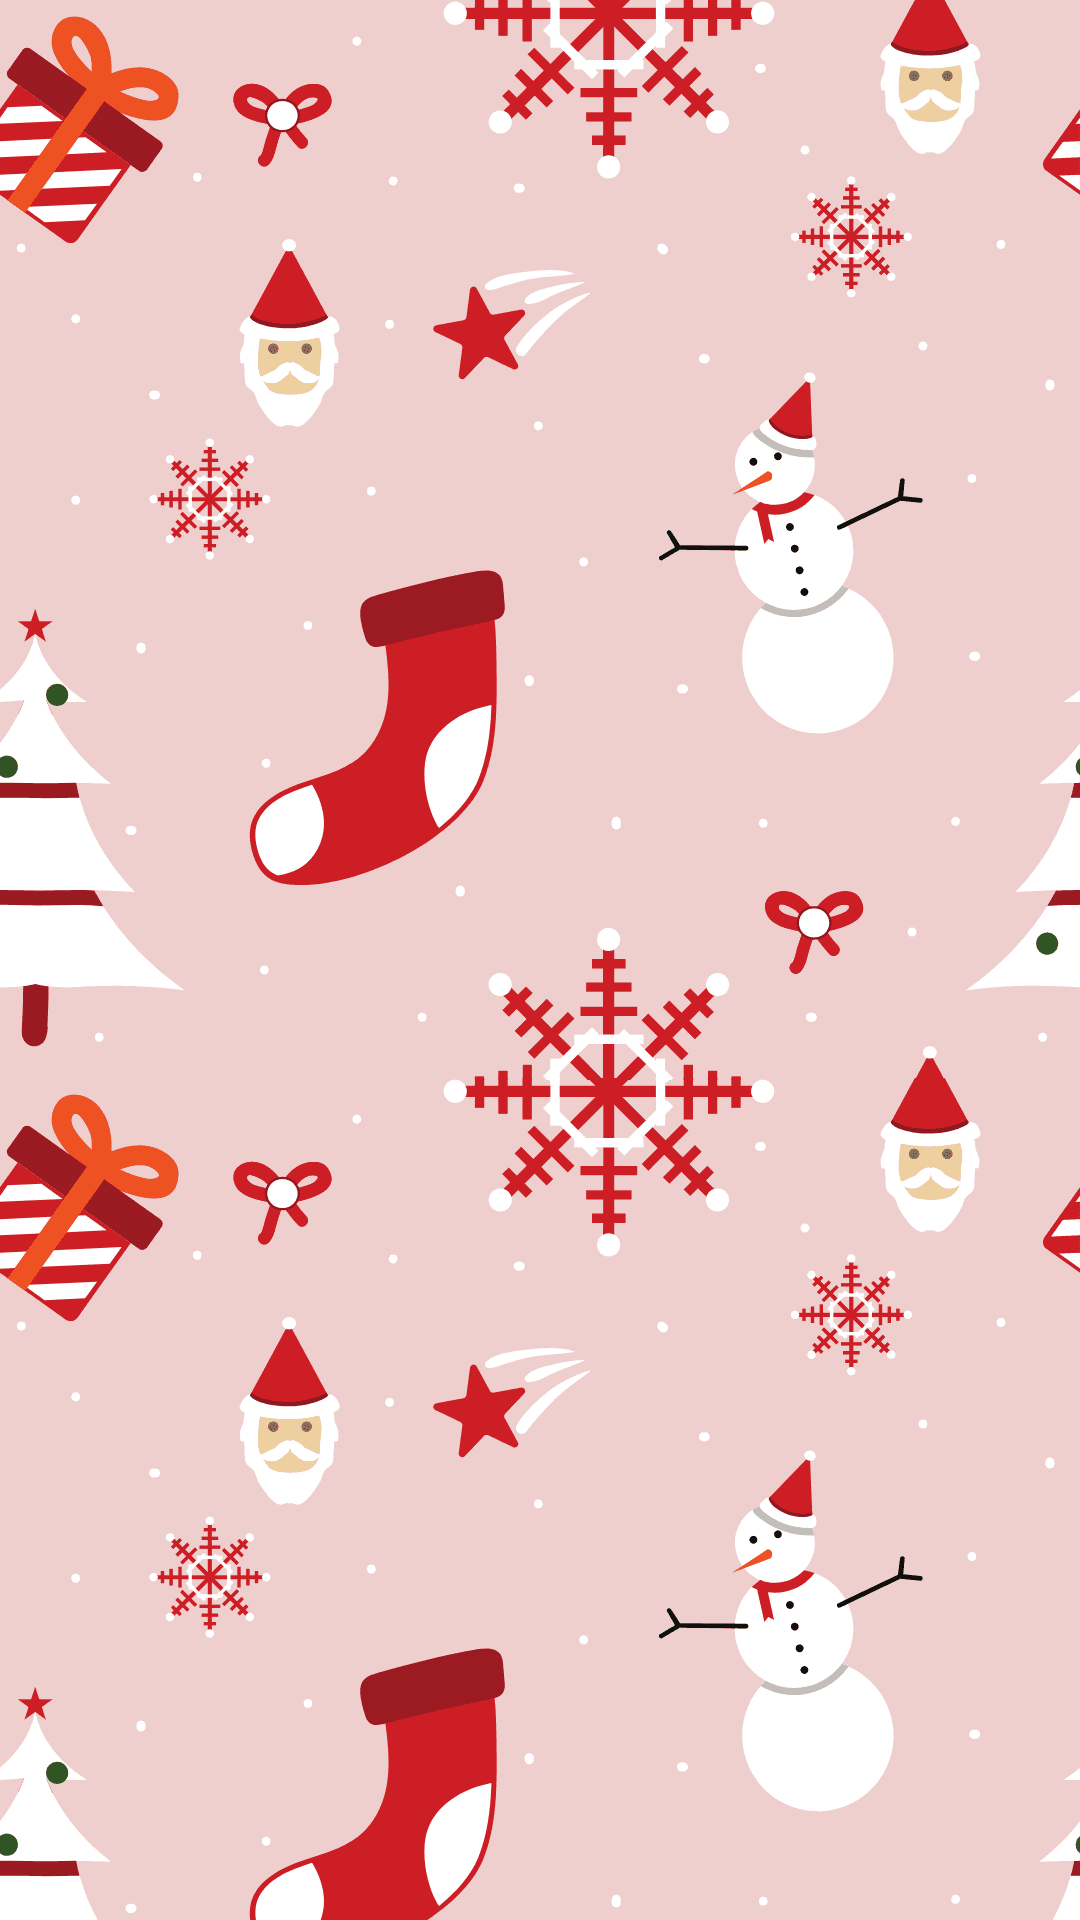 Get into the Christmas spirit with a festive holiday phone background